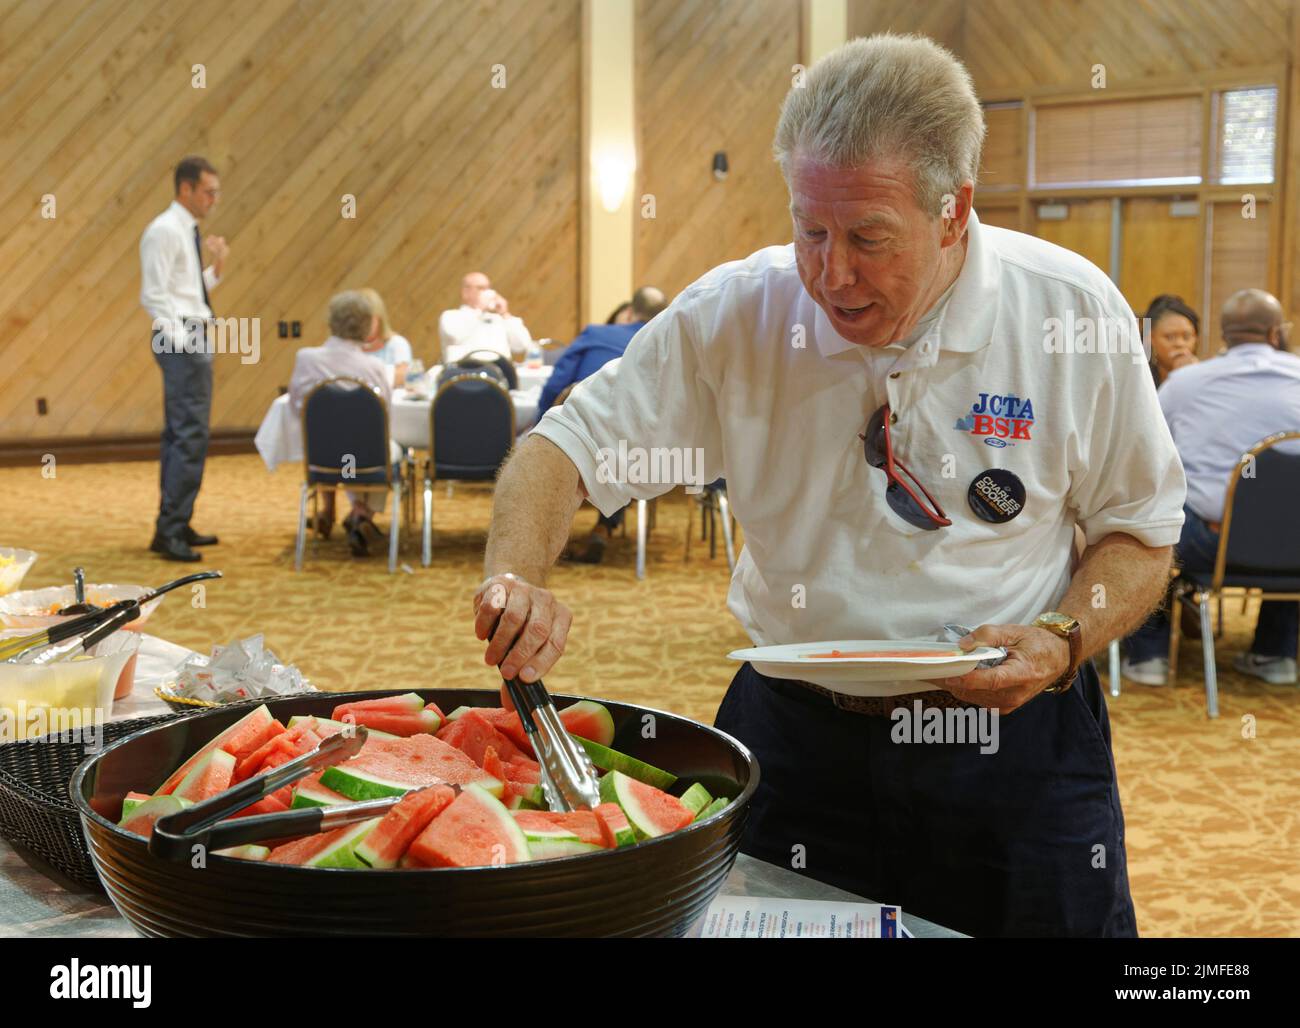 Calvert City, KY, USA. 05 Aug 2022. An unidentified attendee helps himself to sliced watermelon in the buffet line as Marshall County Democratic Party Executive Committee Chair Drew Williams (back left) talks with guests at the 25th Mike Miller Memorial Marshall County Bean Dinner at Kentucky Dam Village State Resort Park. The Marshall County Democratic Party fundraiser is held the night before the annual St. Jerome Fancy Farm Picnic, the traditional start of political campaign season in Kentucky. (Credit: Billy Suratt/Apex MediaWire via Alamy Live News) Stock Photo